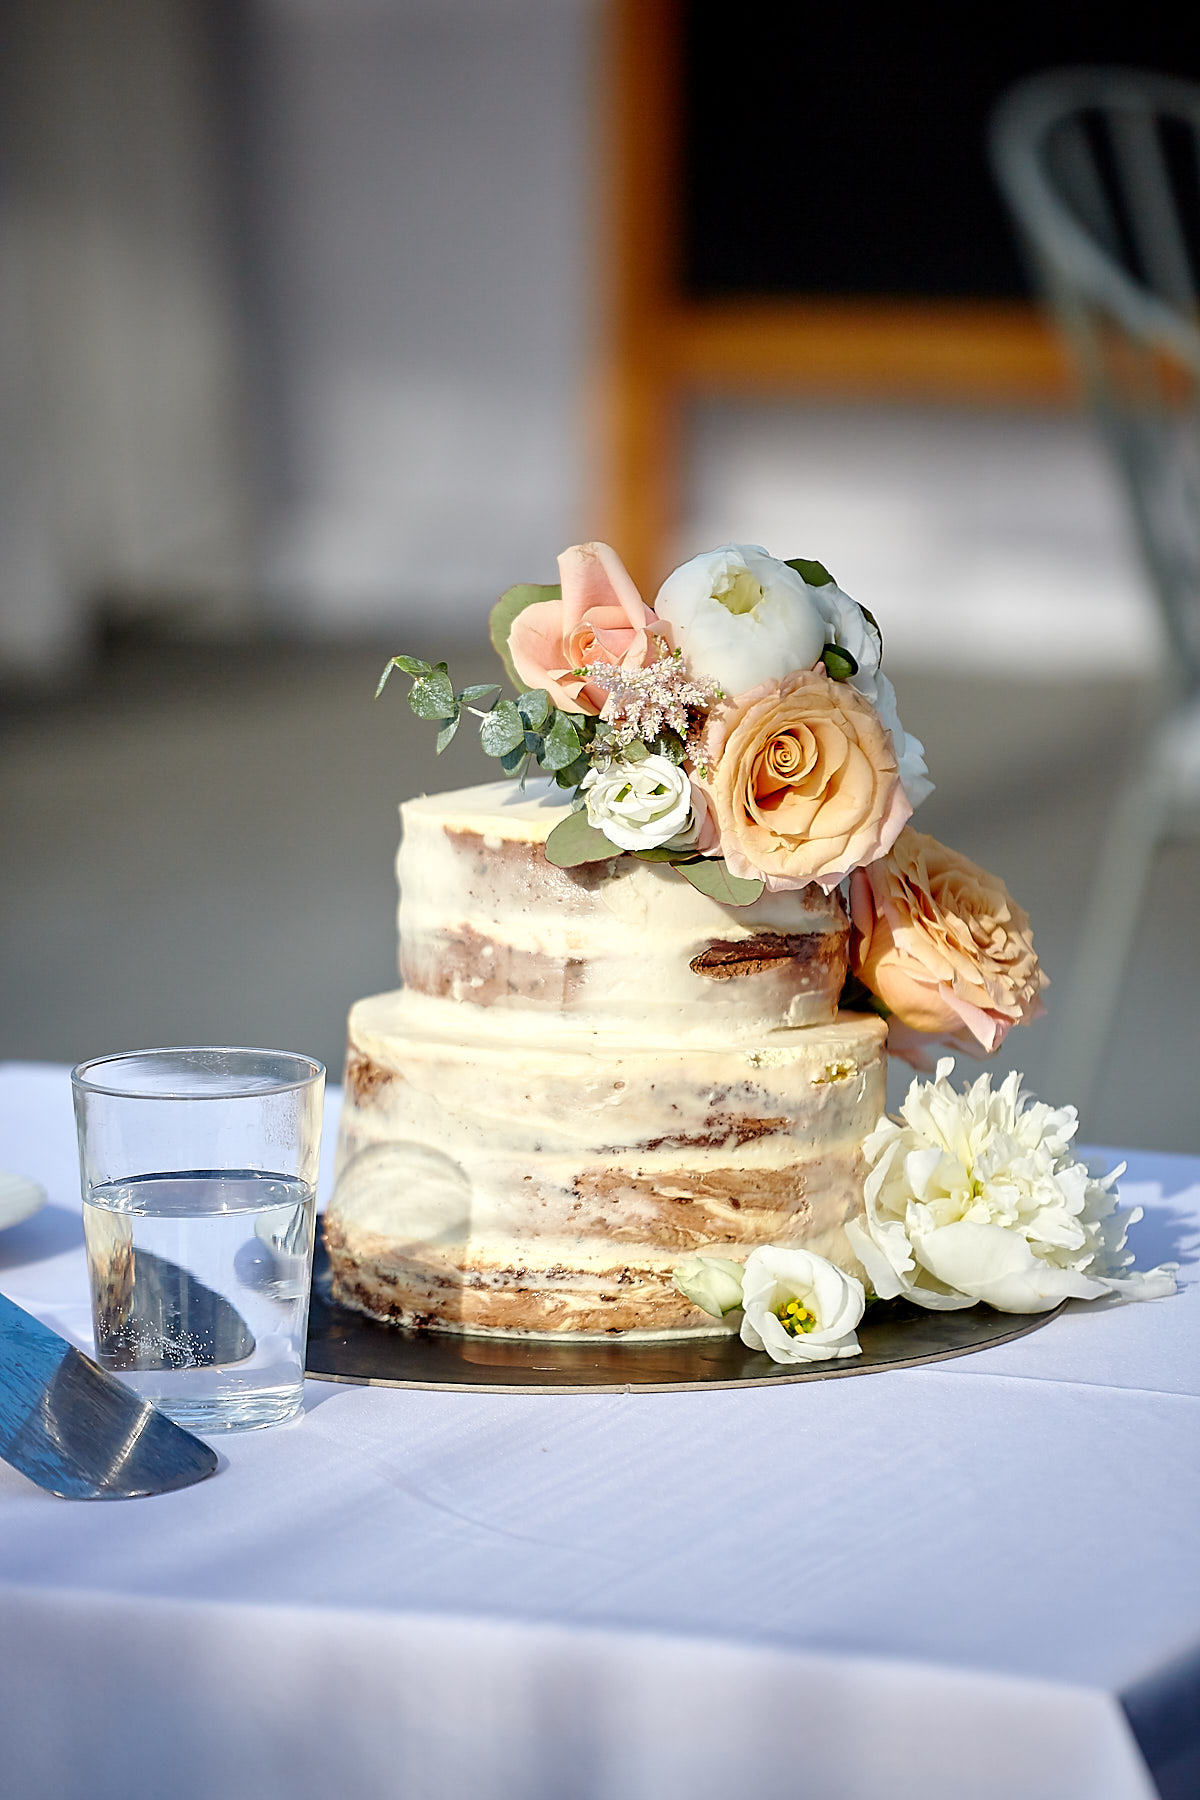 A two layer wedding cake decorated with flowers